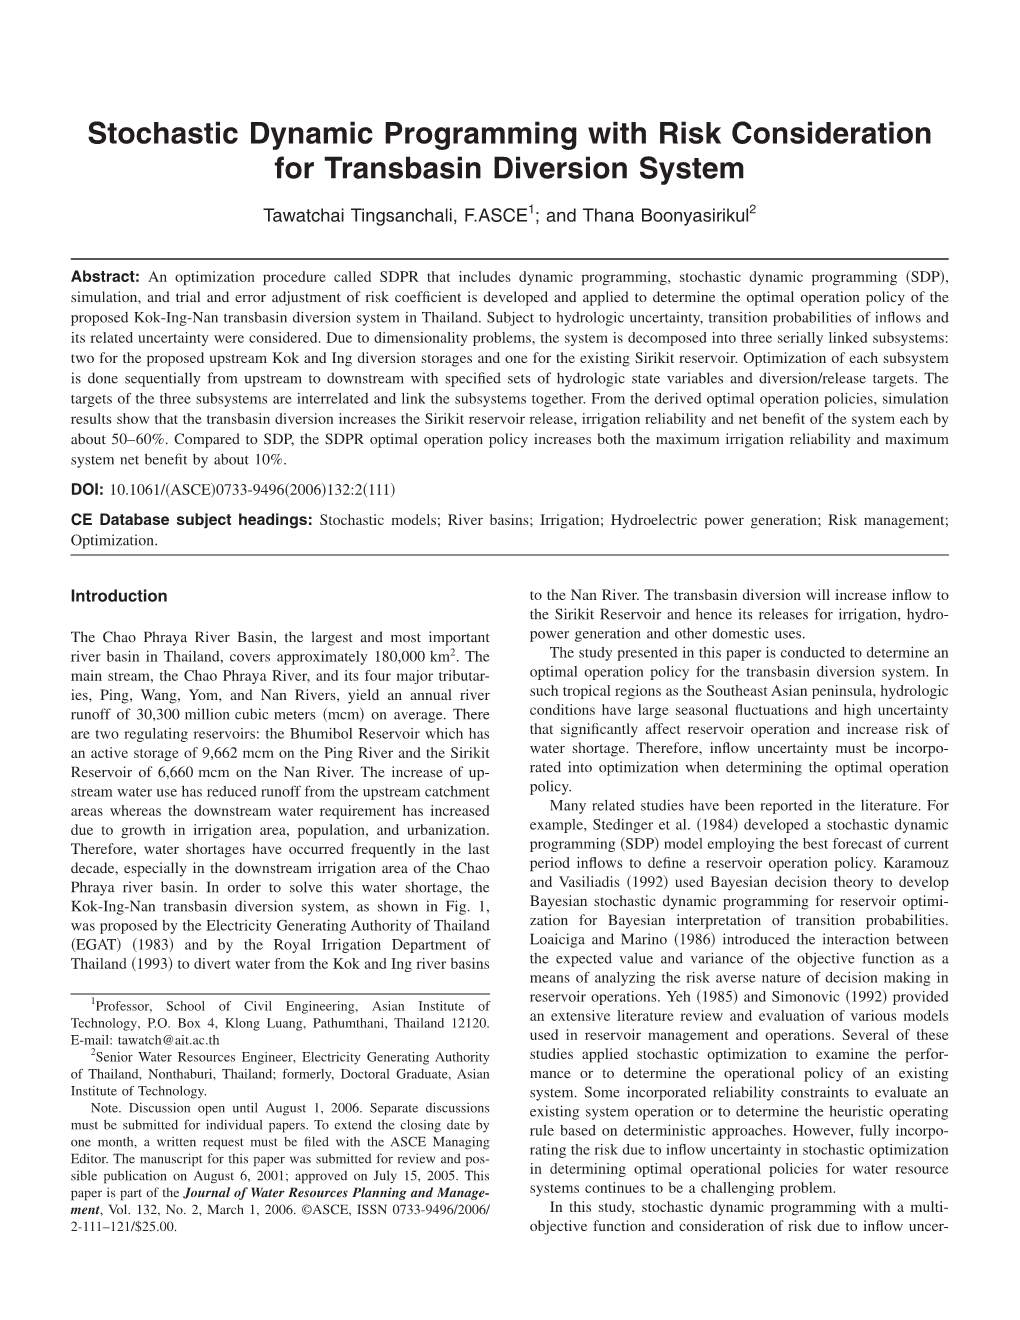 Stochastic Dynamic Programming with Risk Consideration for Transbasin Diversion System